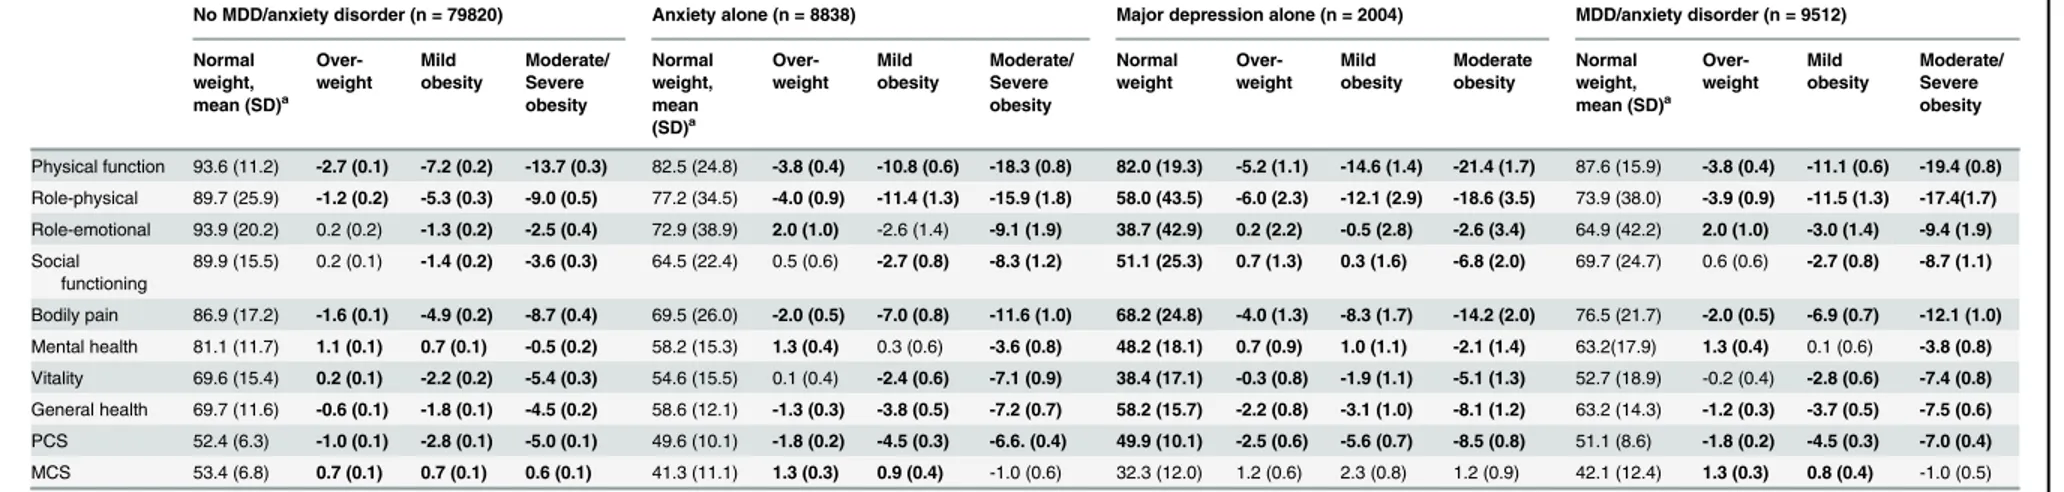 Table 2. Health-related quality of life (HR-QoL) domains in participants by BMI categories and MDD and/or anxiety disorders: deviation with standard error from the mean for normal weight participants.